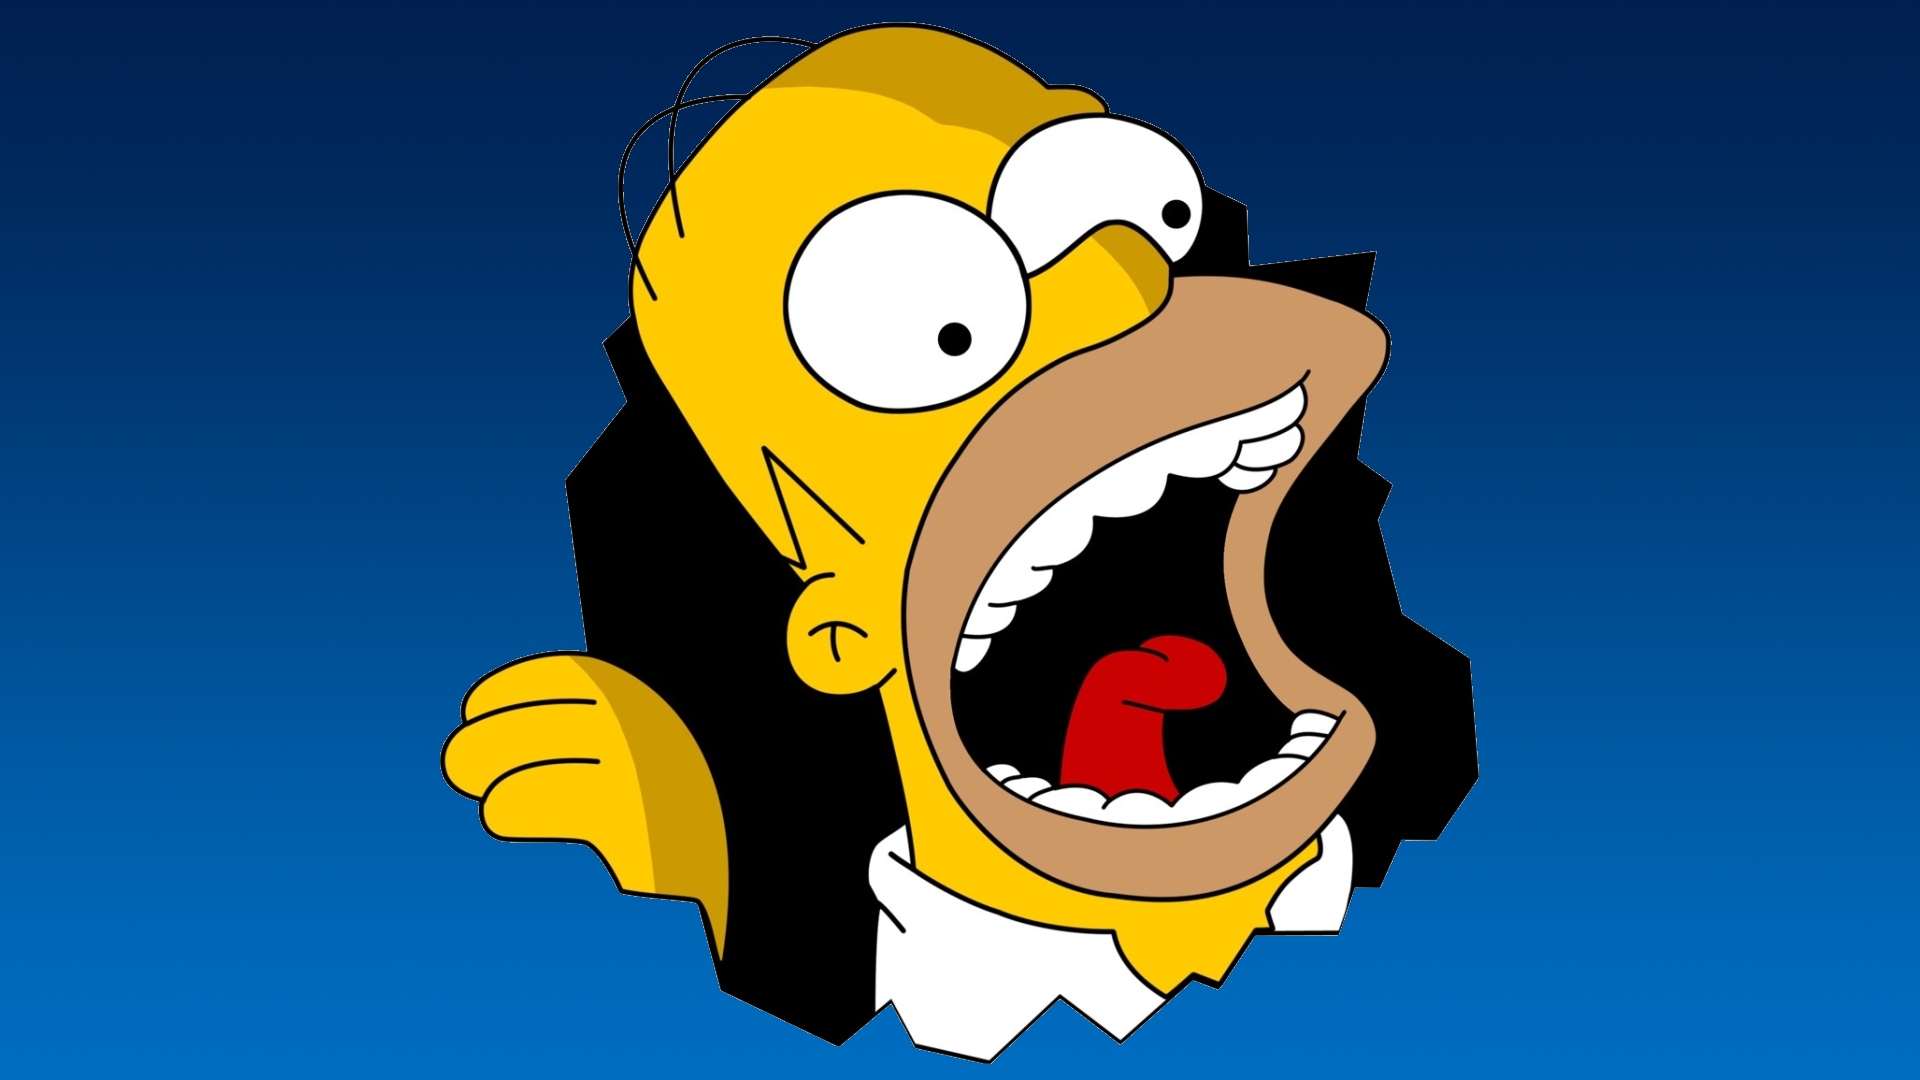 Your Photos On Your Web Site - Homer Simpson Windows 10 - HD Wallpaper 